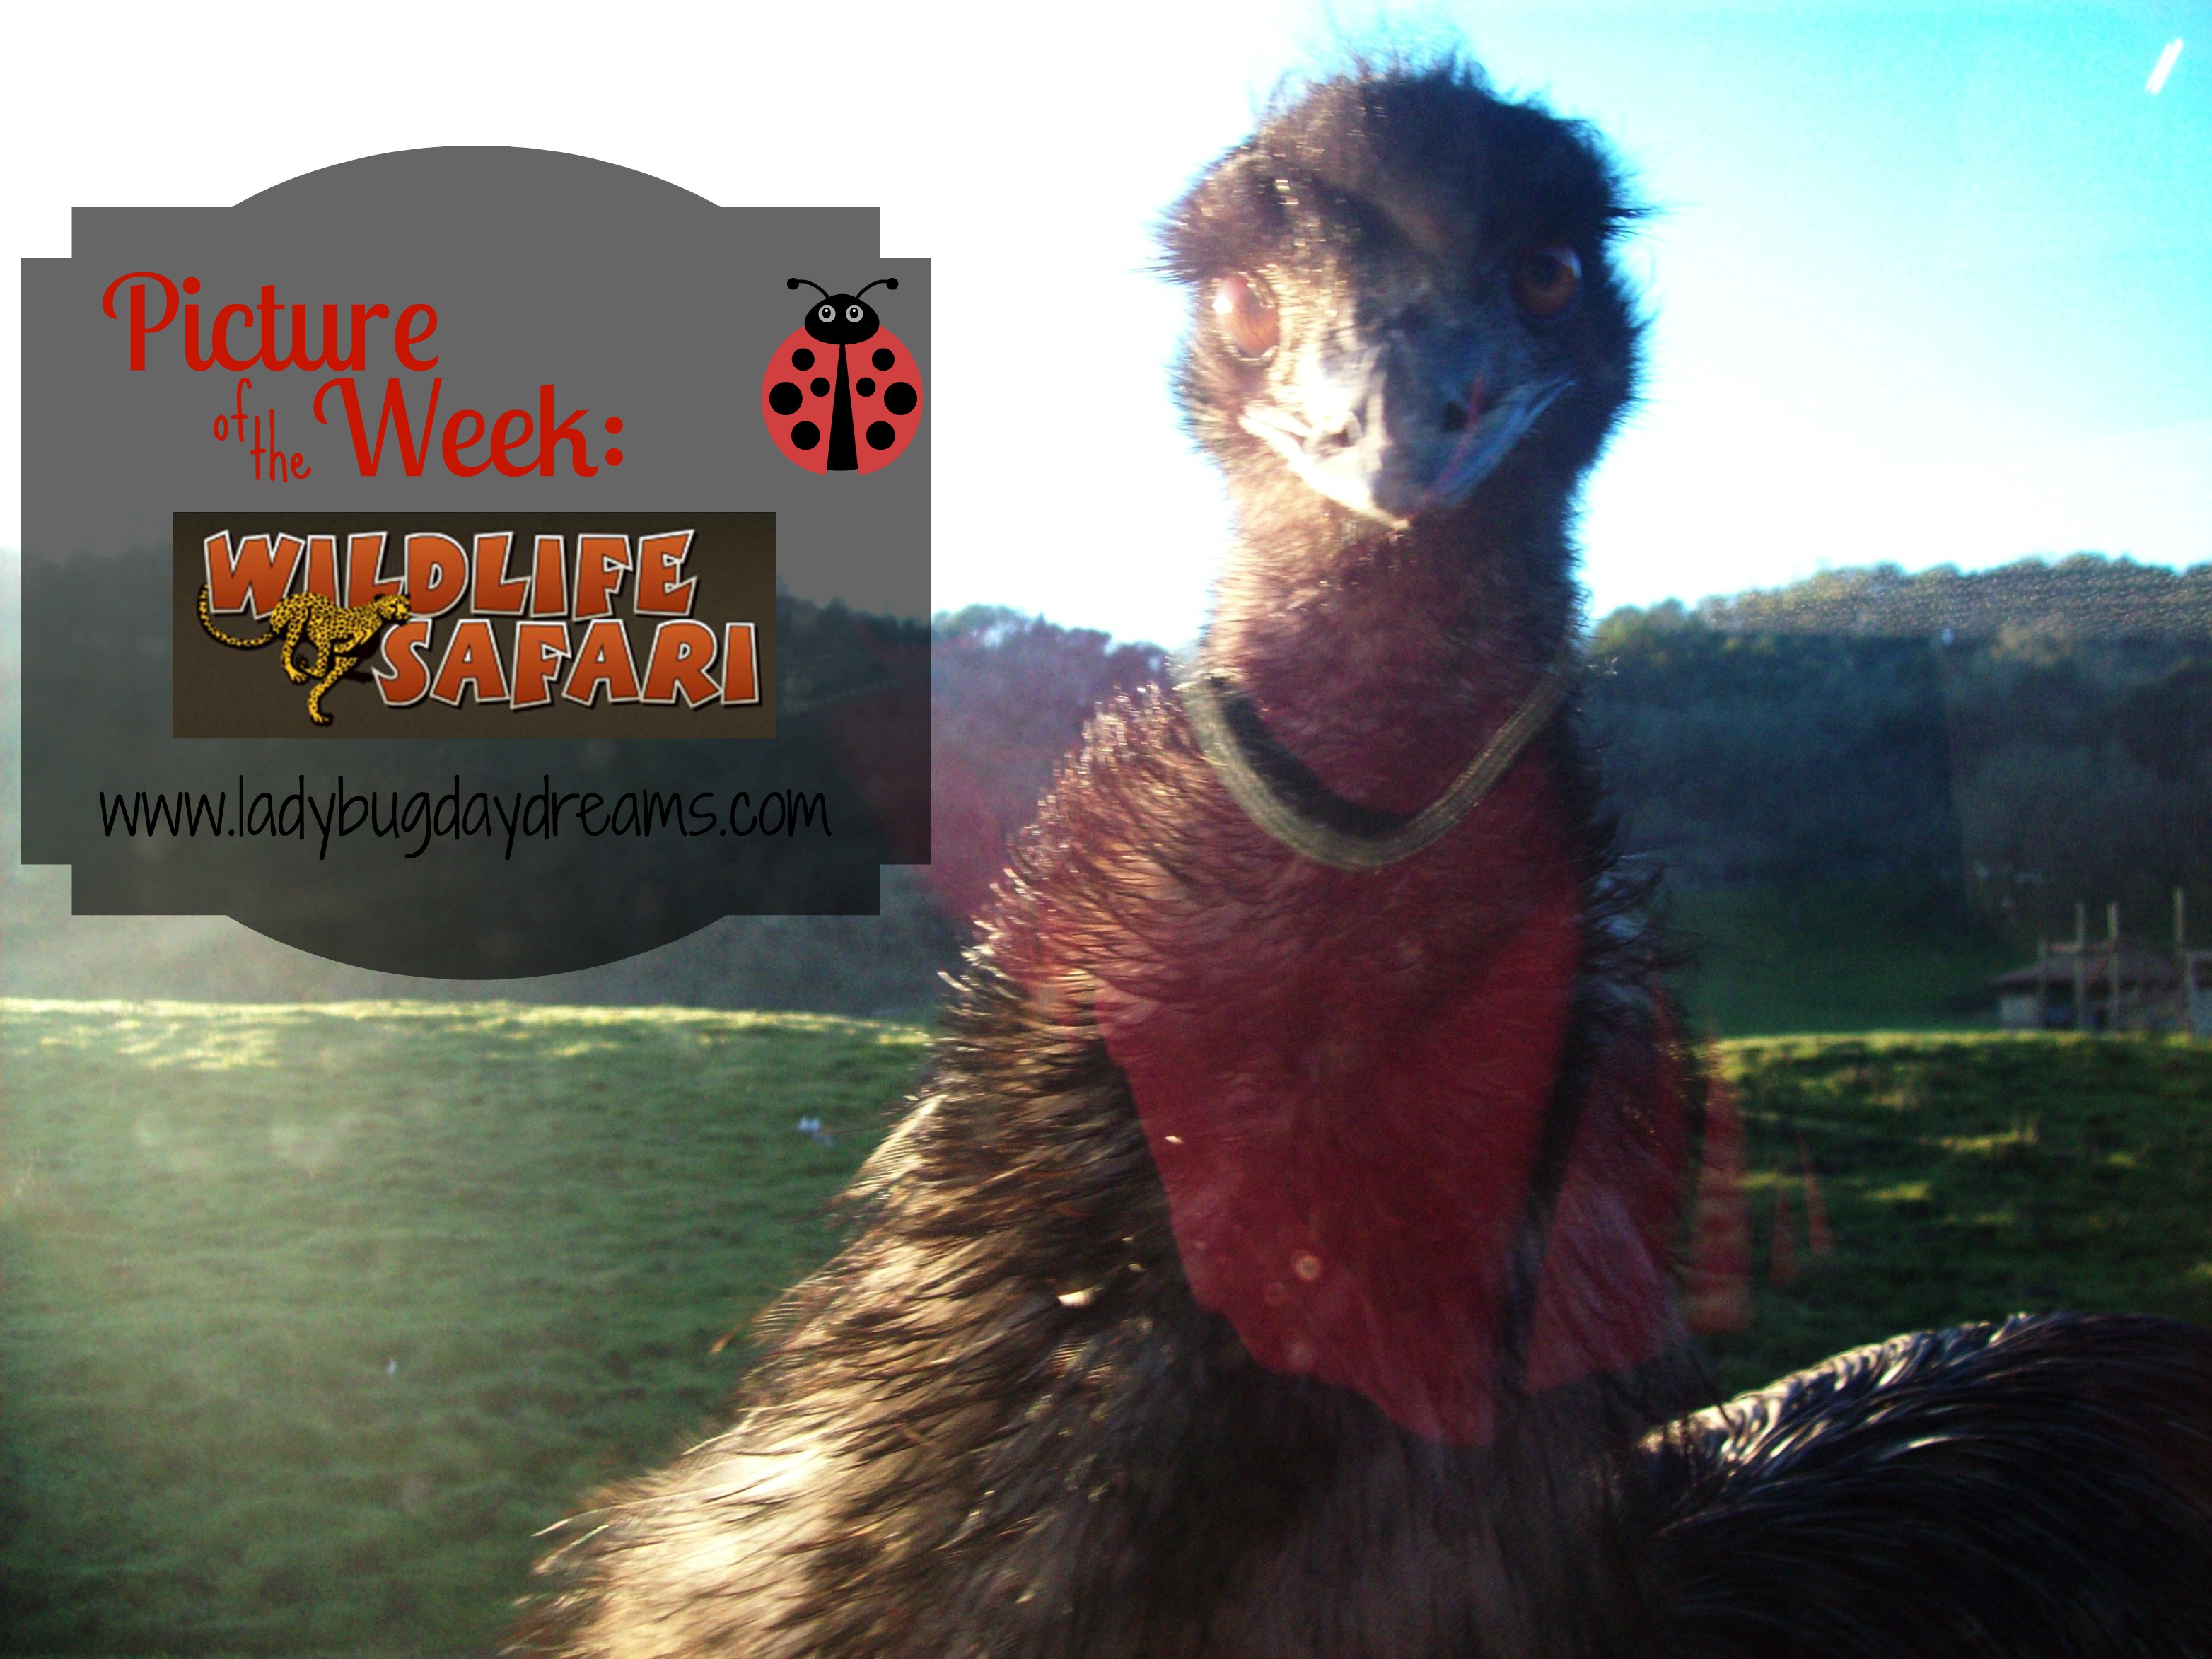 Why, yes, that is an emu attacking our car!